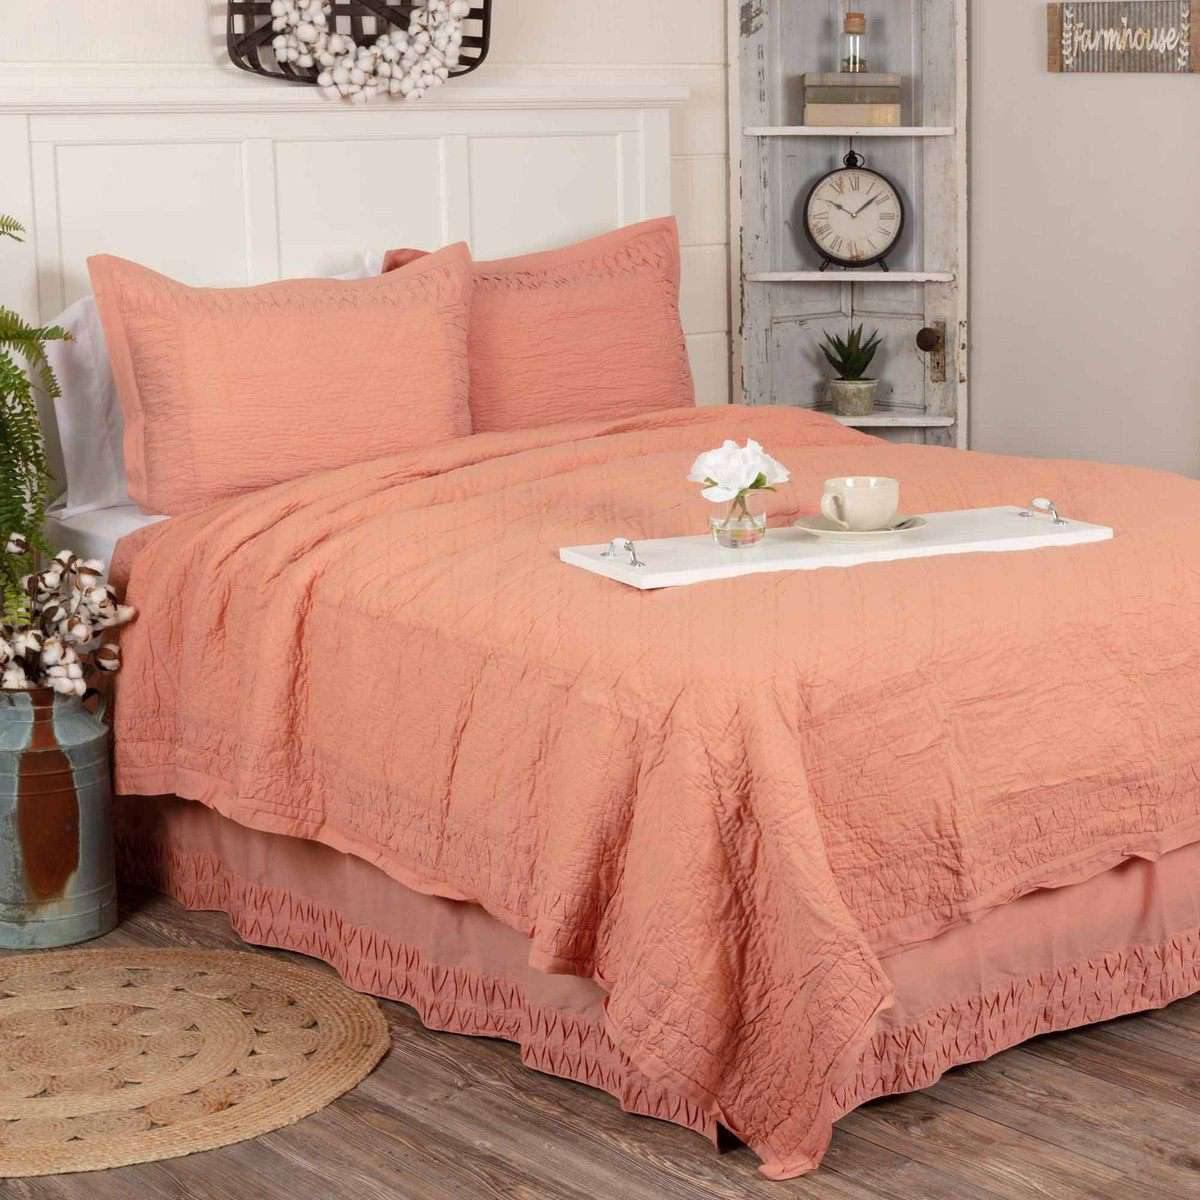 Adelia Apricot Queen Quilt 90Wx90L VHC Brands